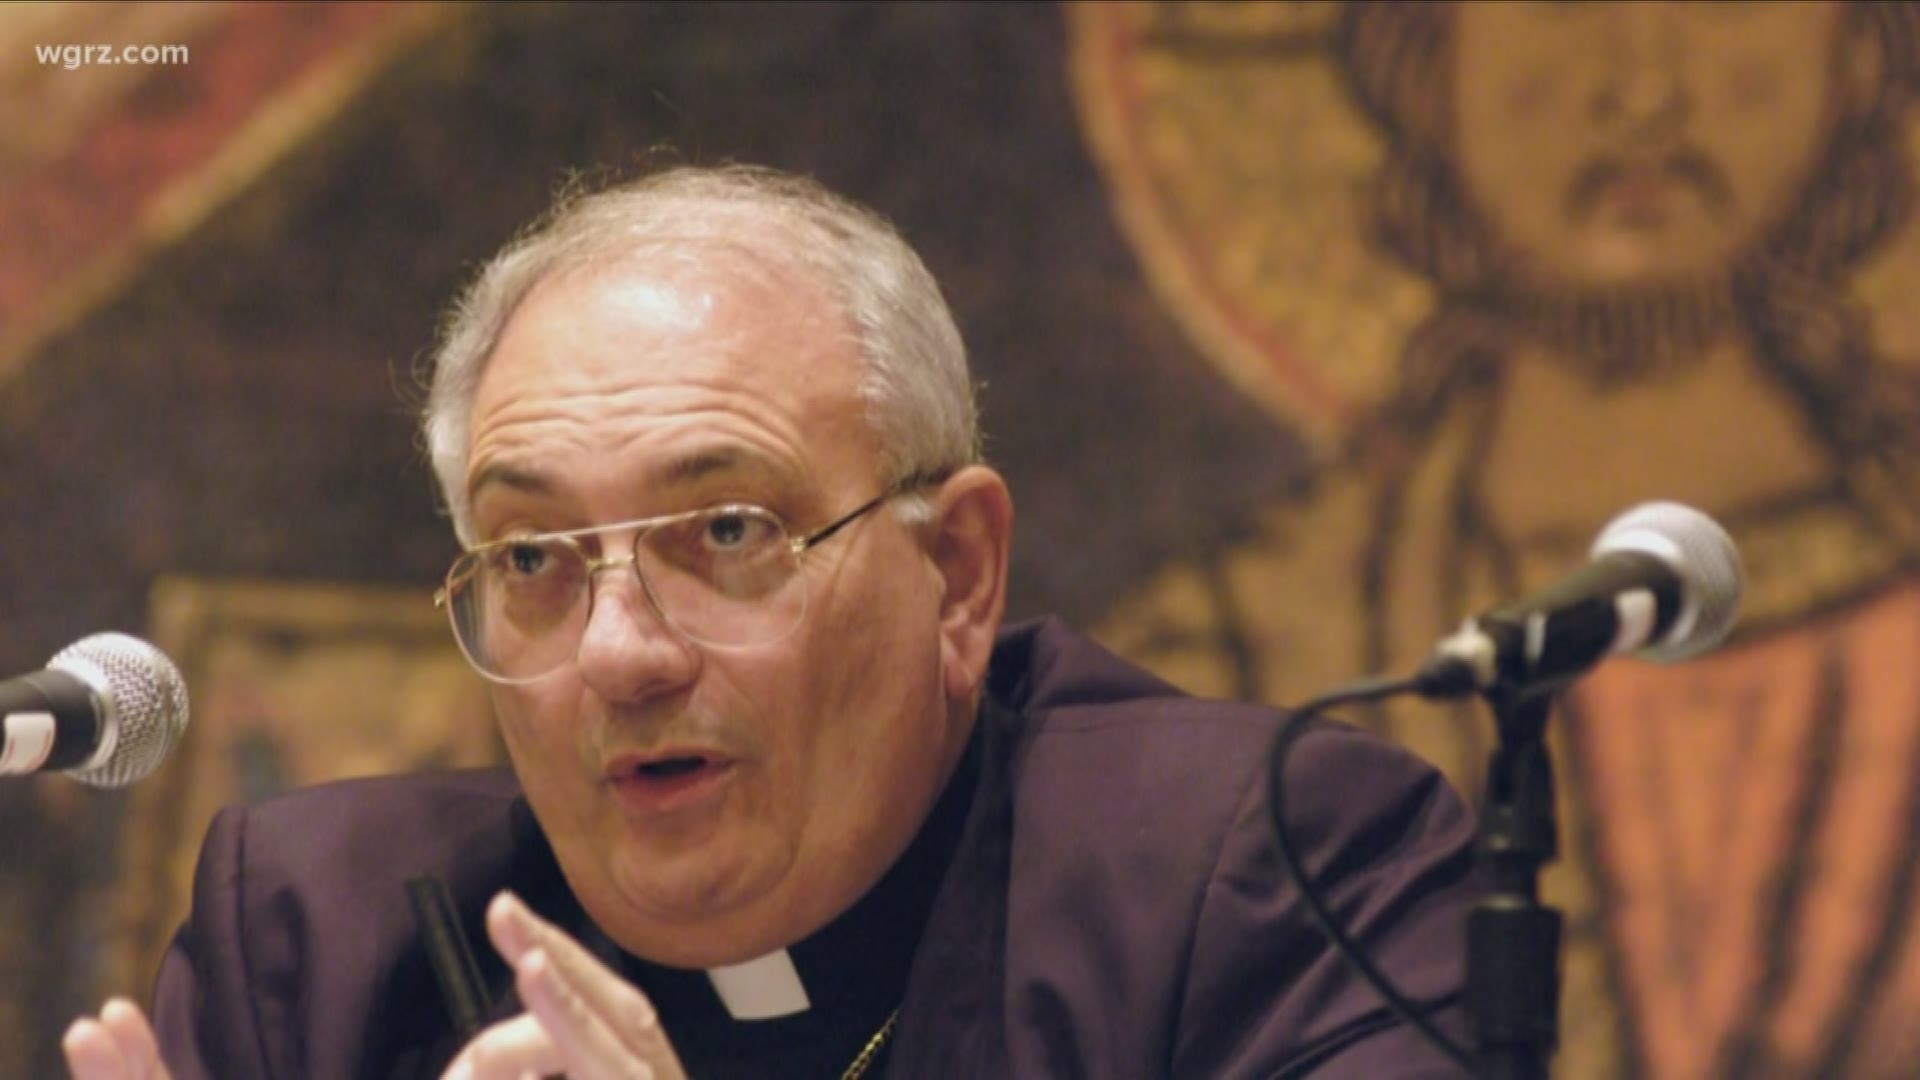 Brooklyn's Bishop wraps up investigation into Buffalo diocese